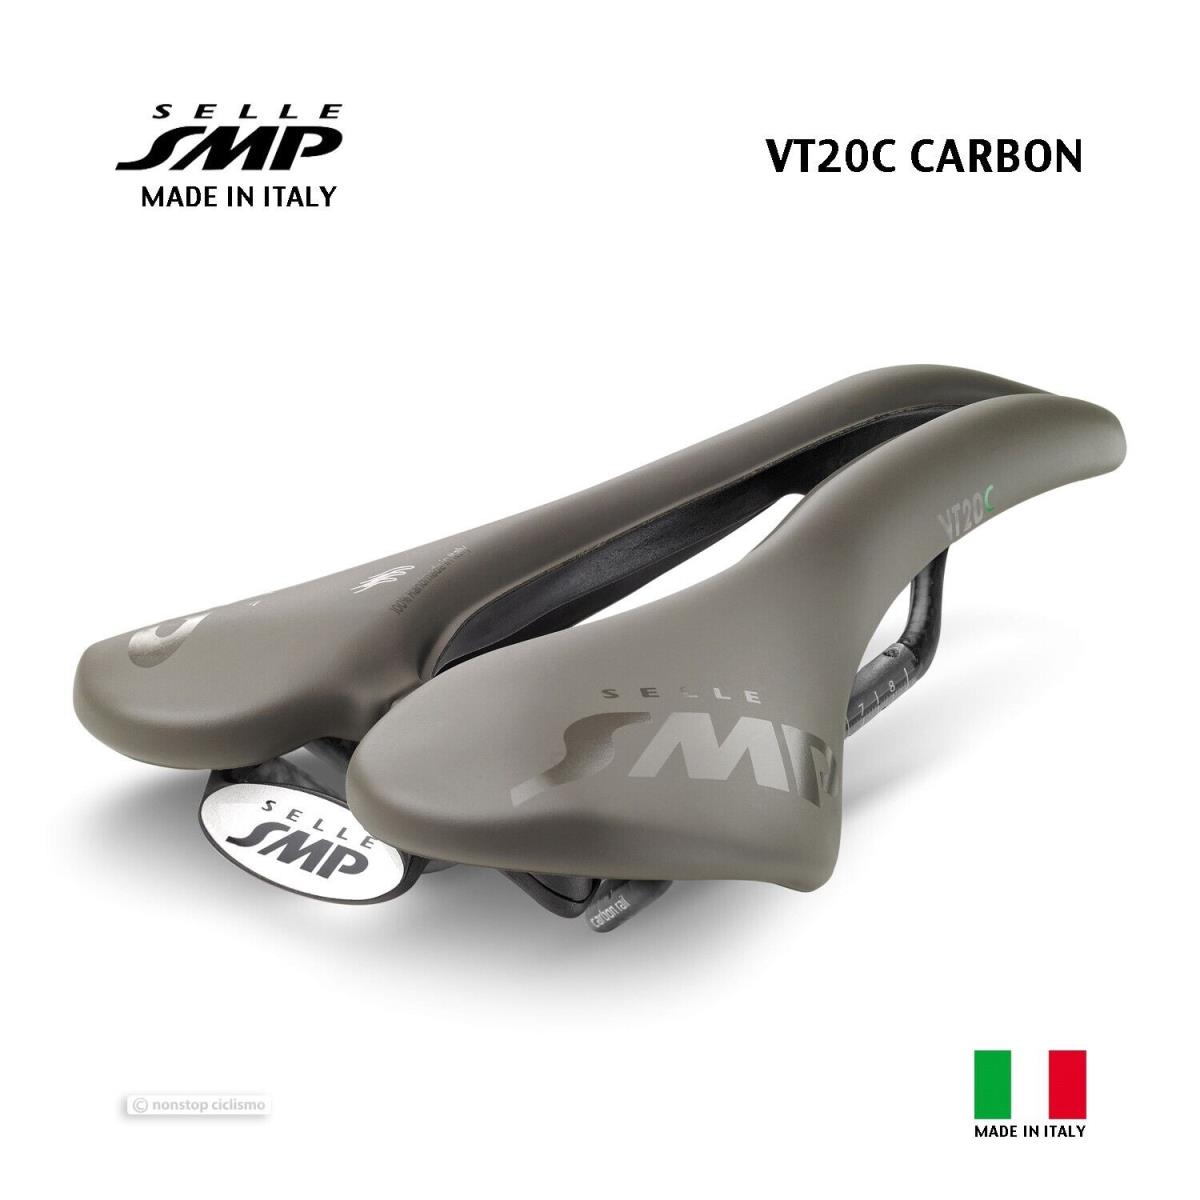 Selle Smp VT20C Carbon Saddle : Grey-brown - Made IN Italy